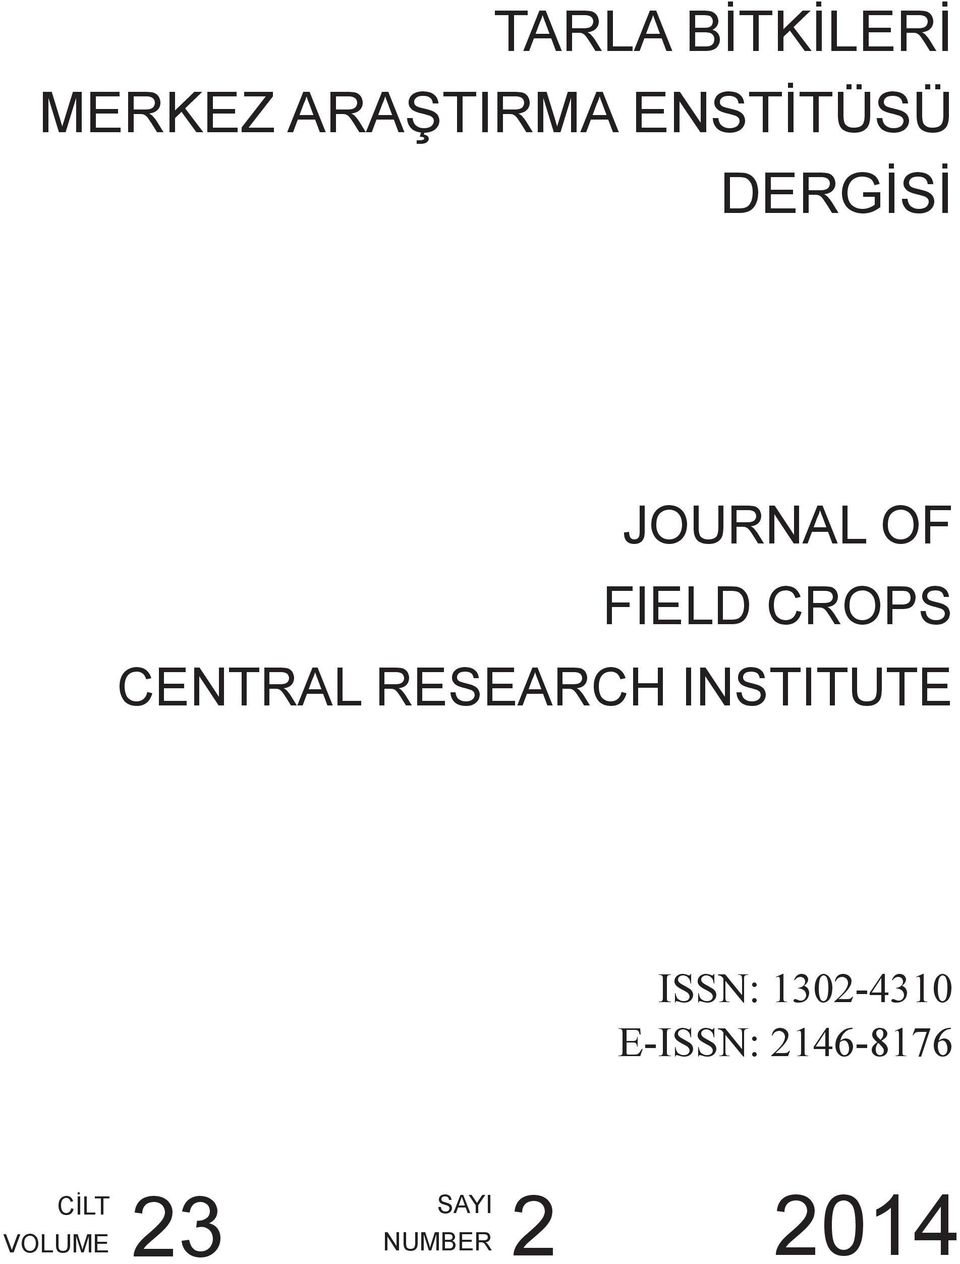 CENTRAL RESEARCH INSTITUTE ISSN: